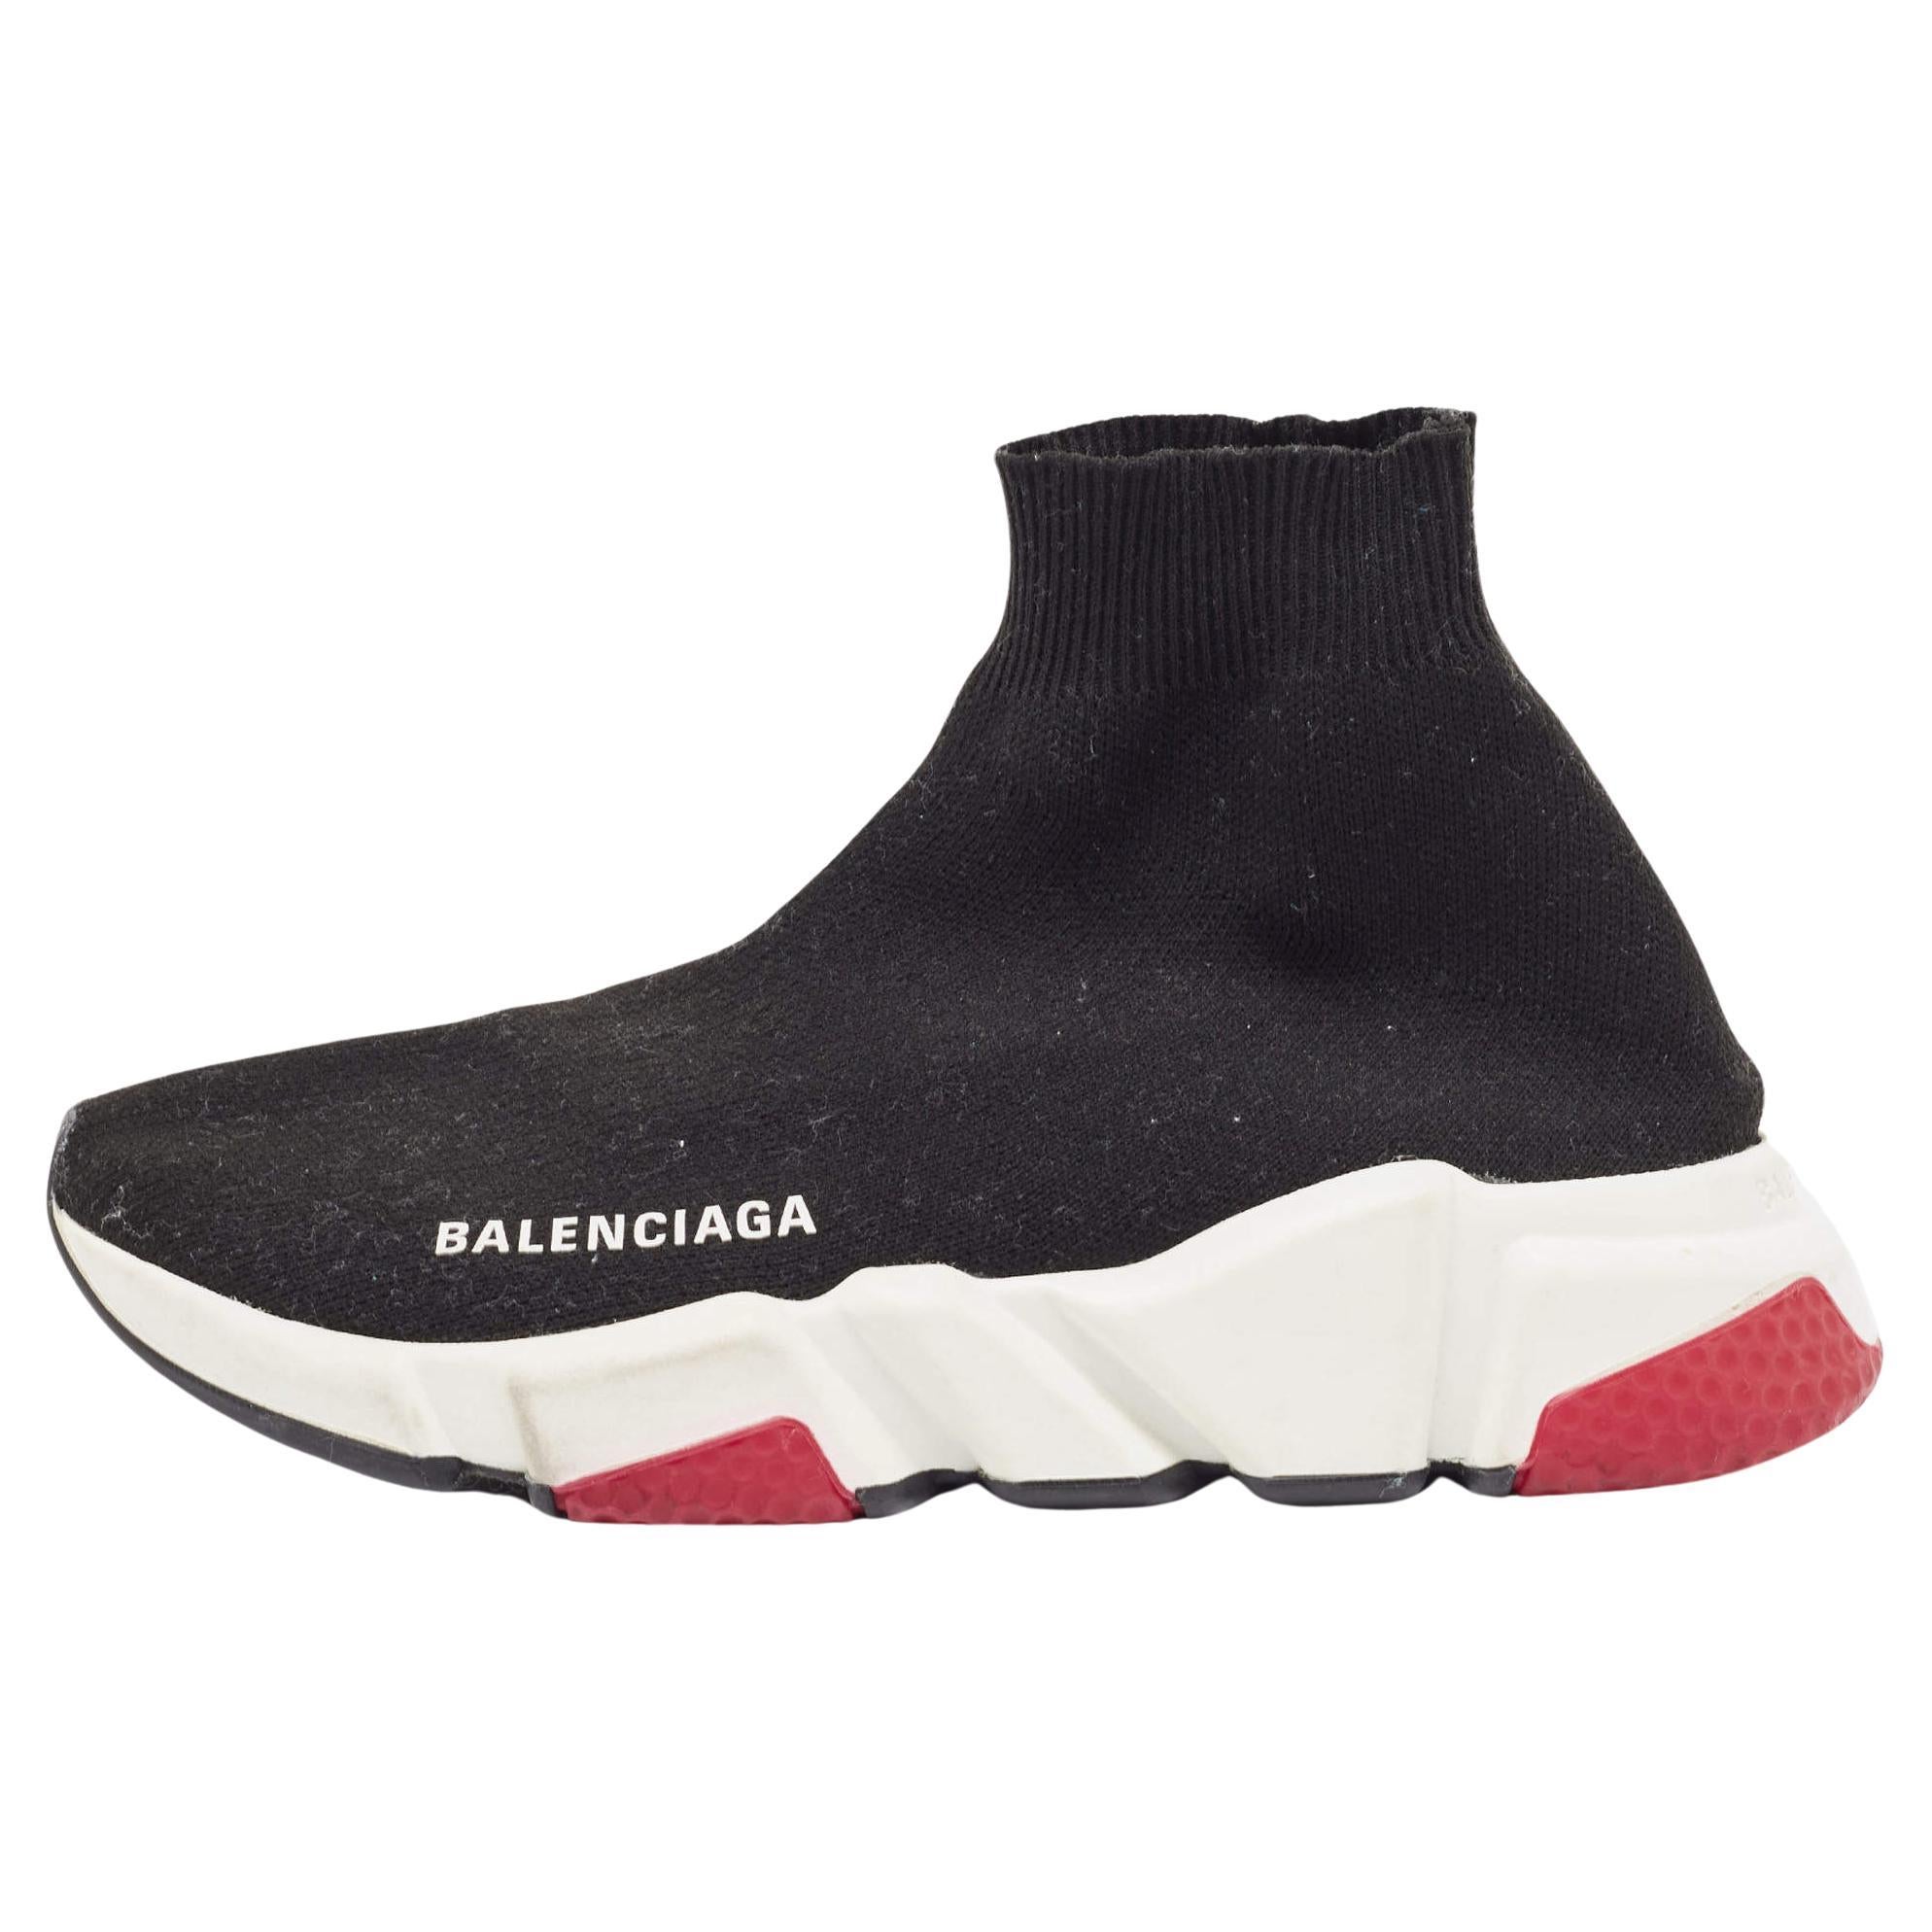 Balenciaga Black Knit Fabric Speed Trainer Sneakers Size 35 For Sale